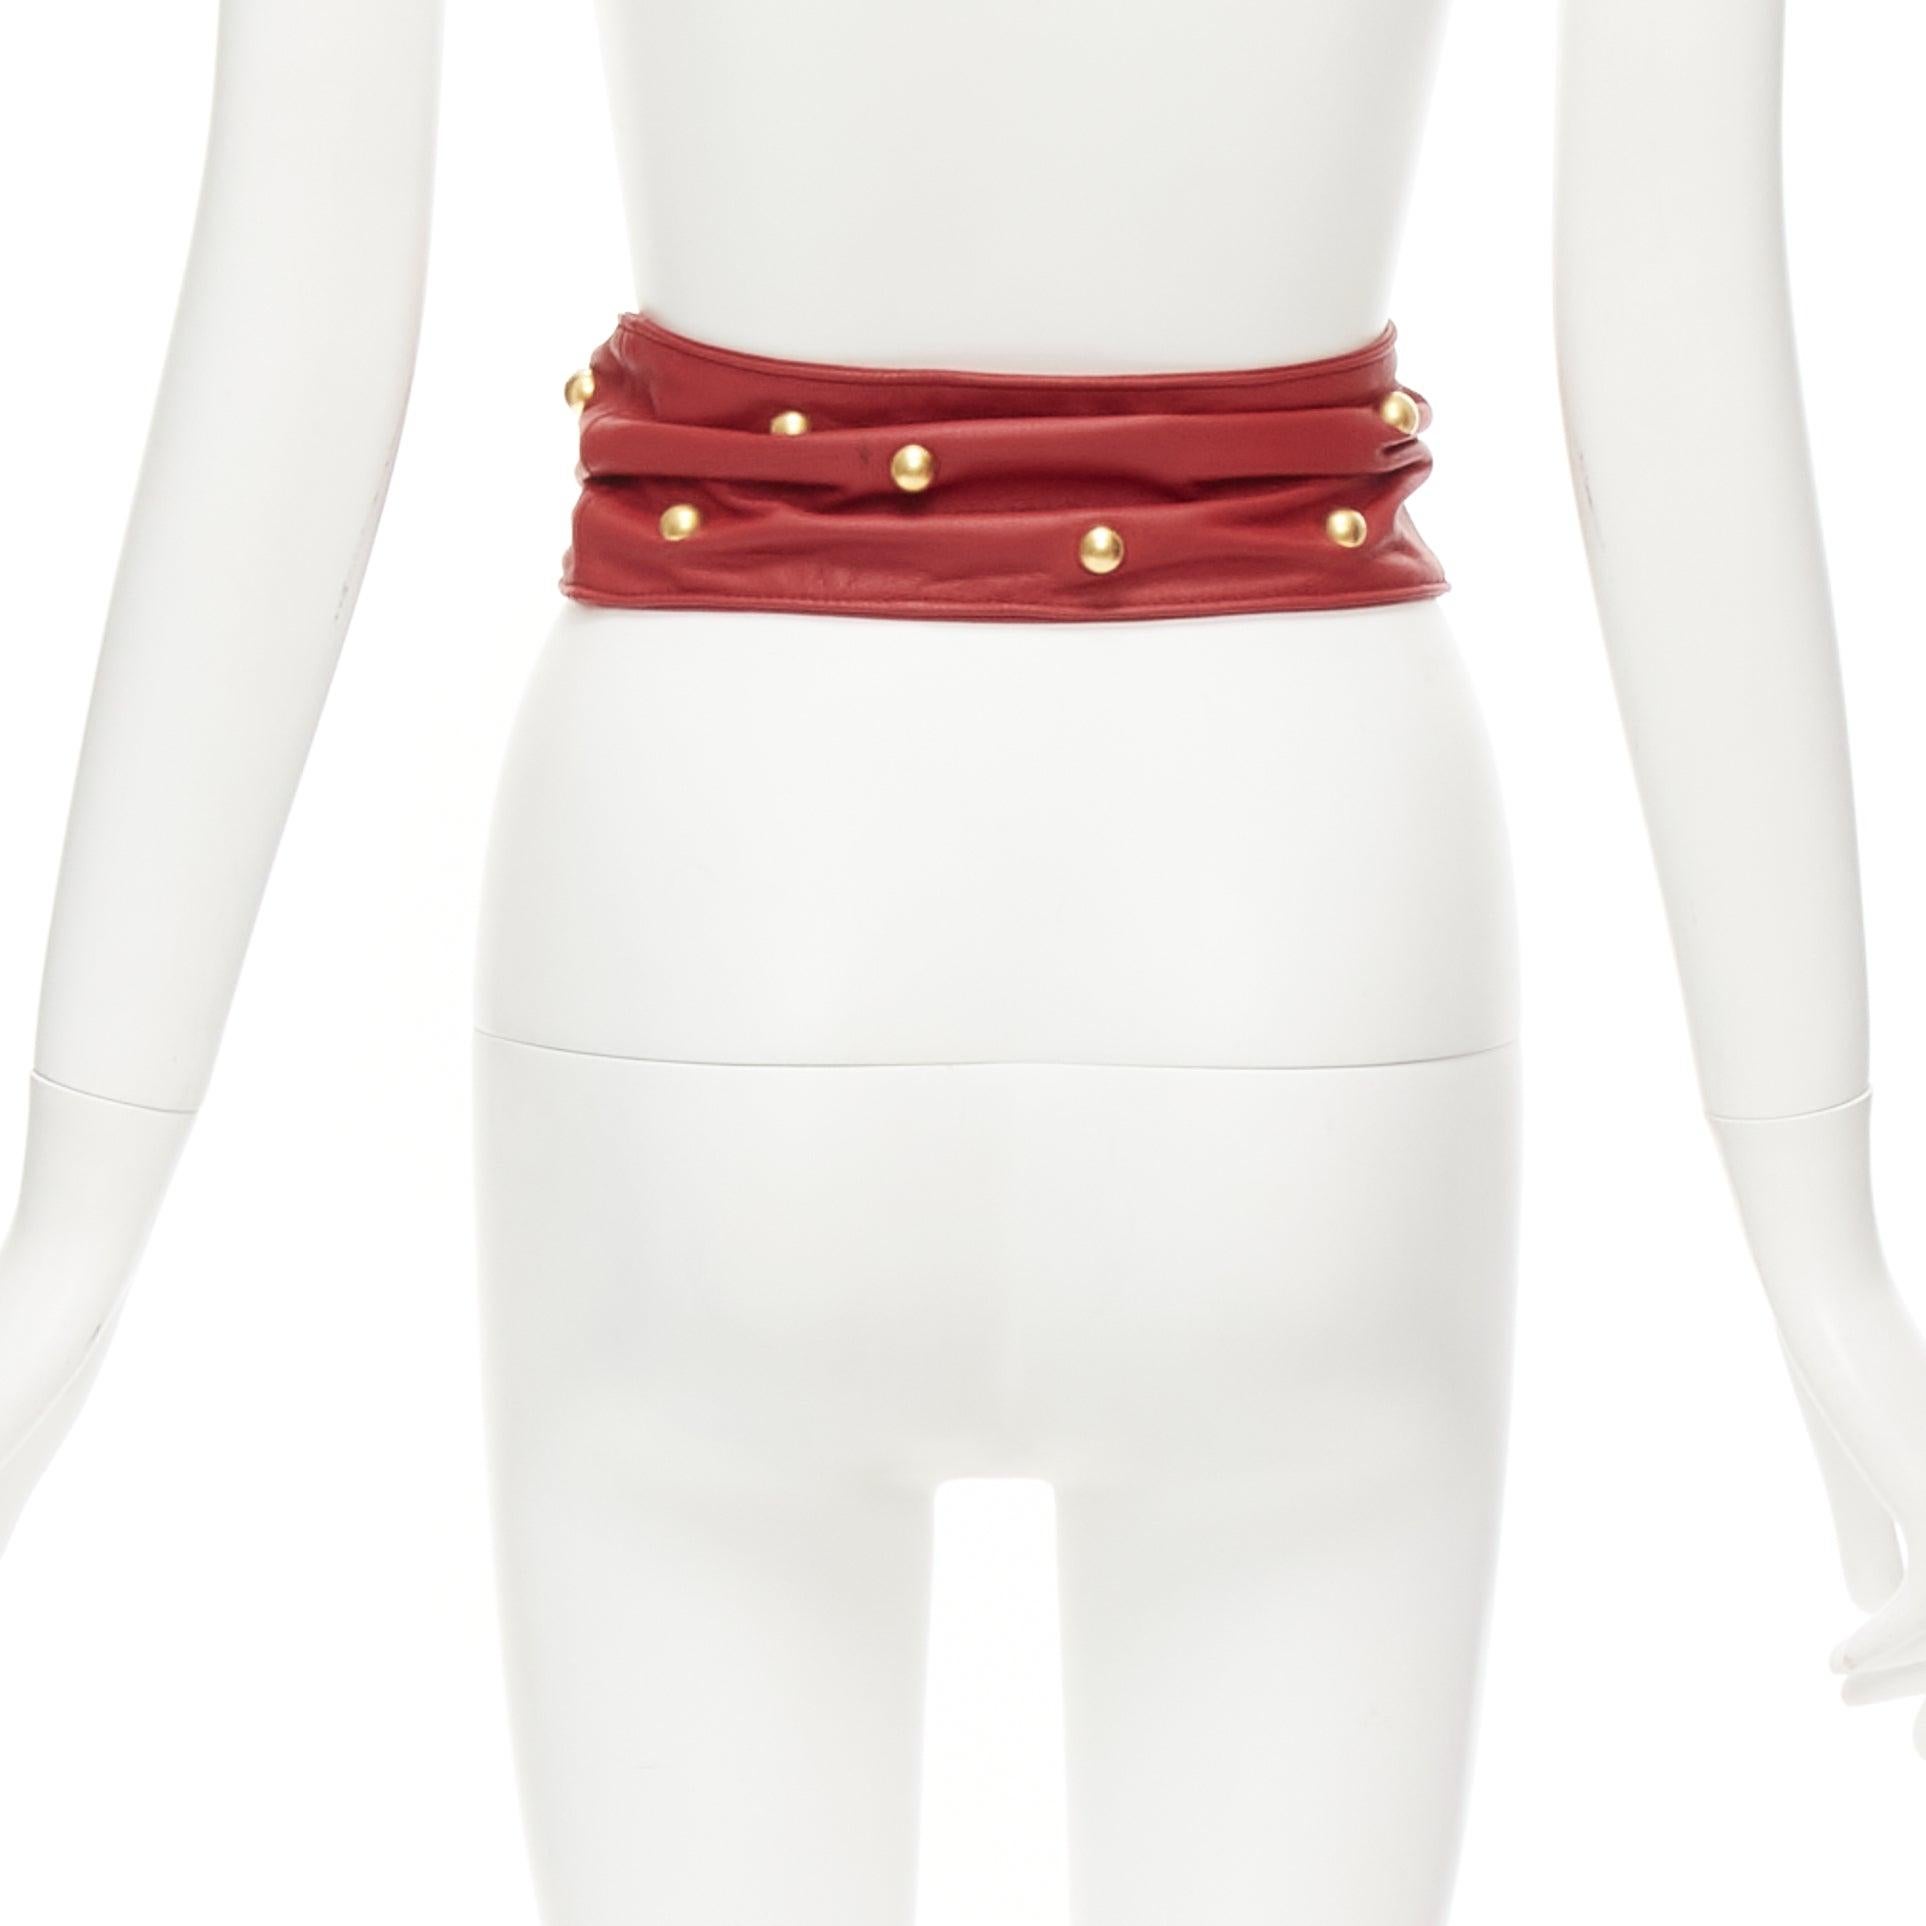 PHILOSOPHY DI LORENZO SERAFINI red soft leather gold dome studs wide belt S For Sale 1